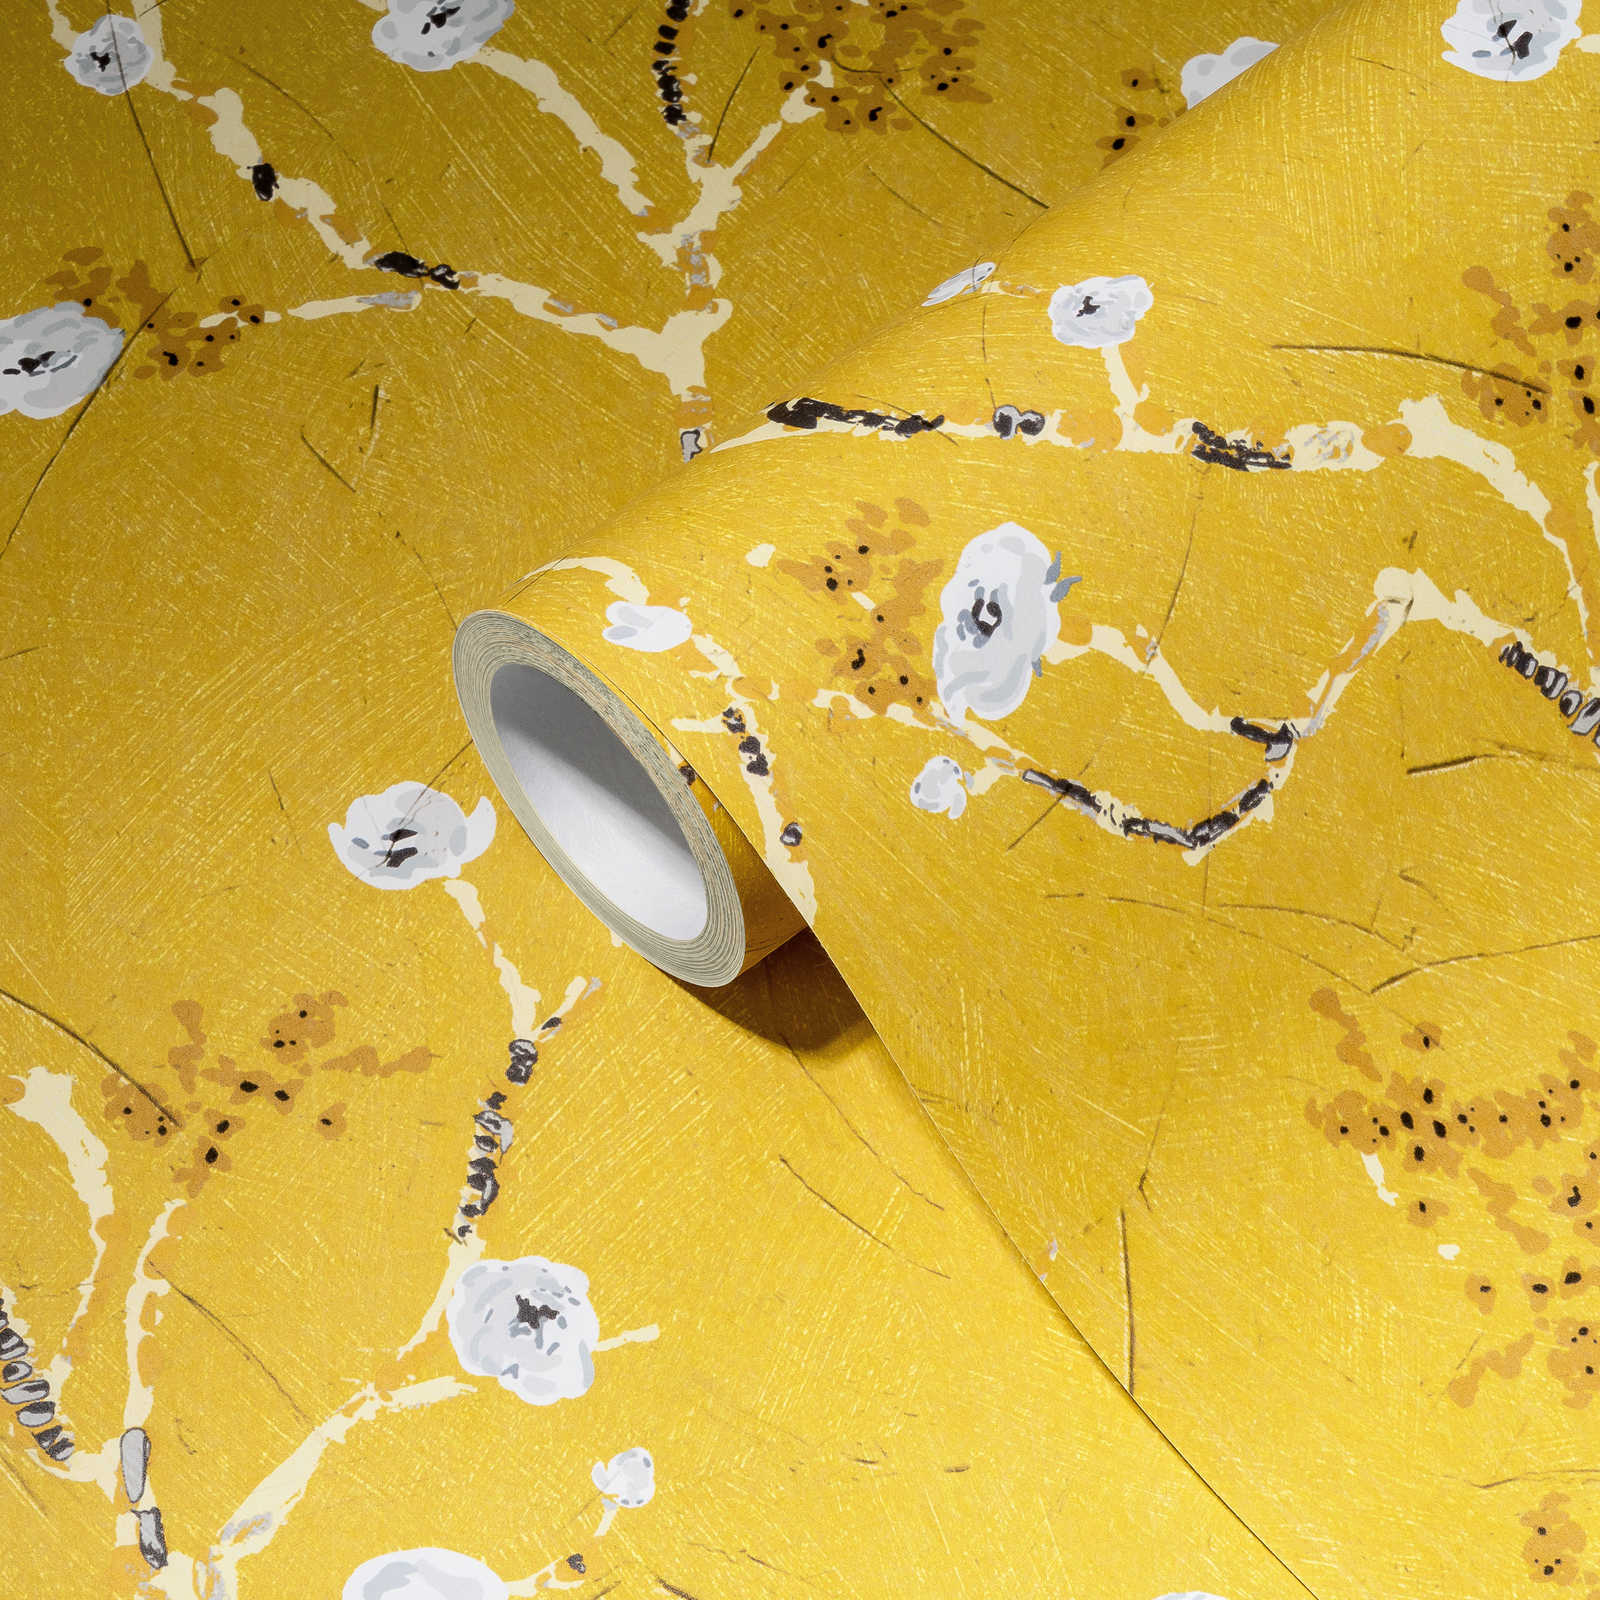             Yellow wallpaper with flowering branches in drawing style
        